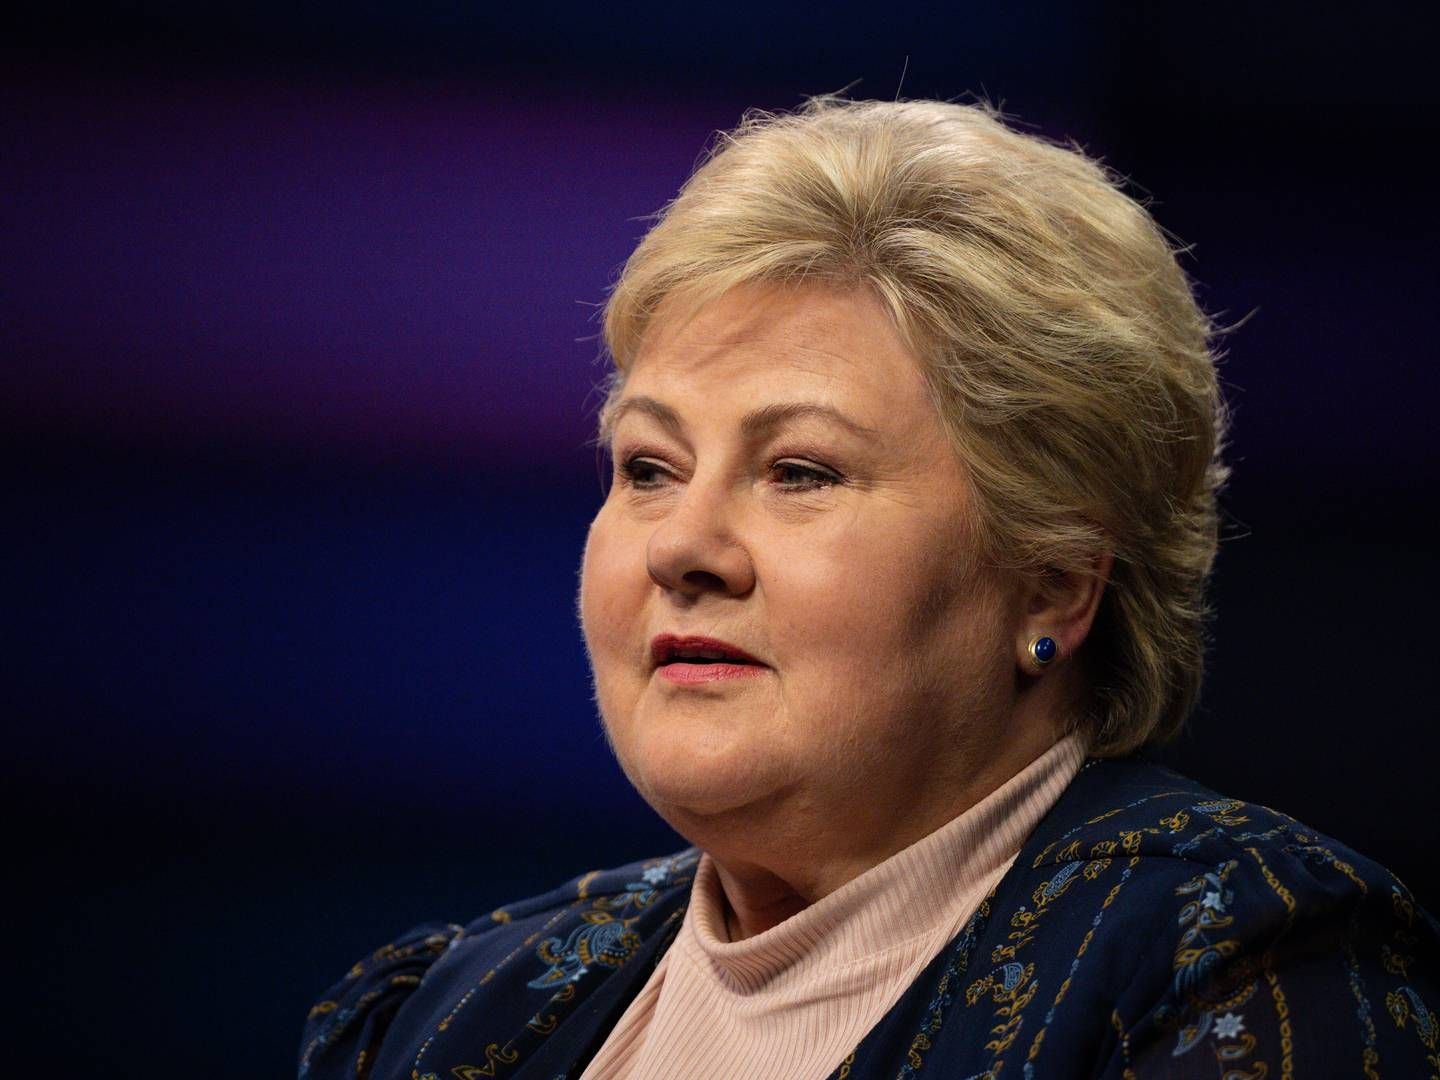 Erna Solberg conducted a marathon of interviews on Thursday last week to answer questions about her husband's share trading and her impartiality. Here from the live debate program "Debatten" on the Norwegian state channel NRK. | Photo: Beate Oma Dahle/NTB/Ritzau Scanpix